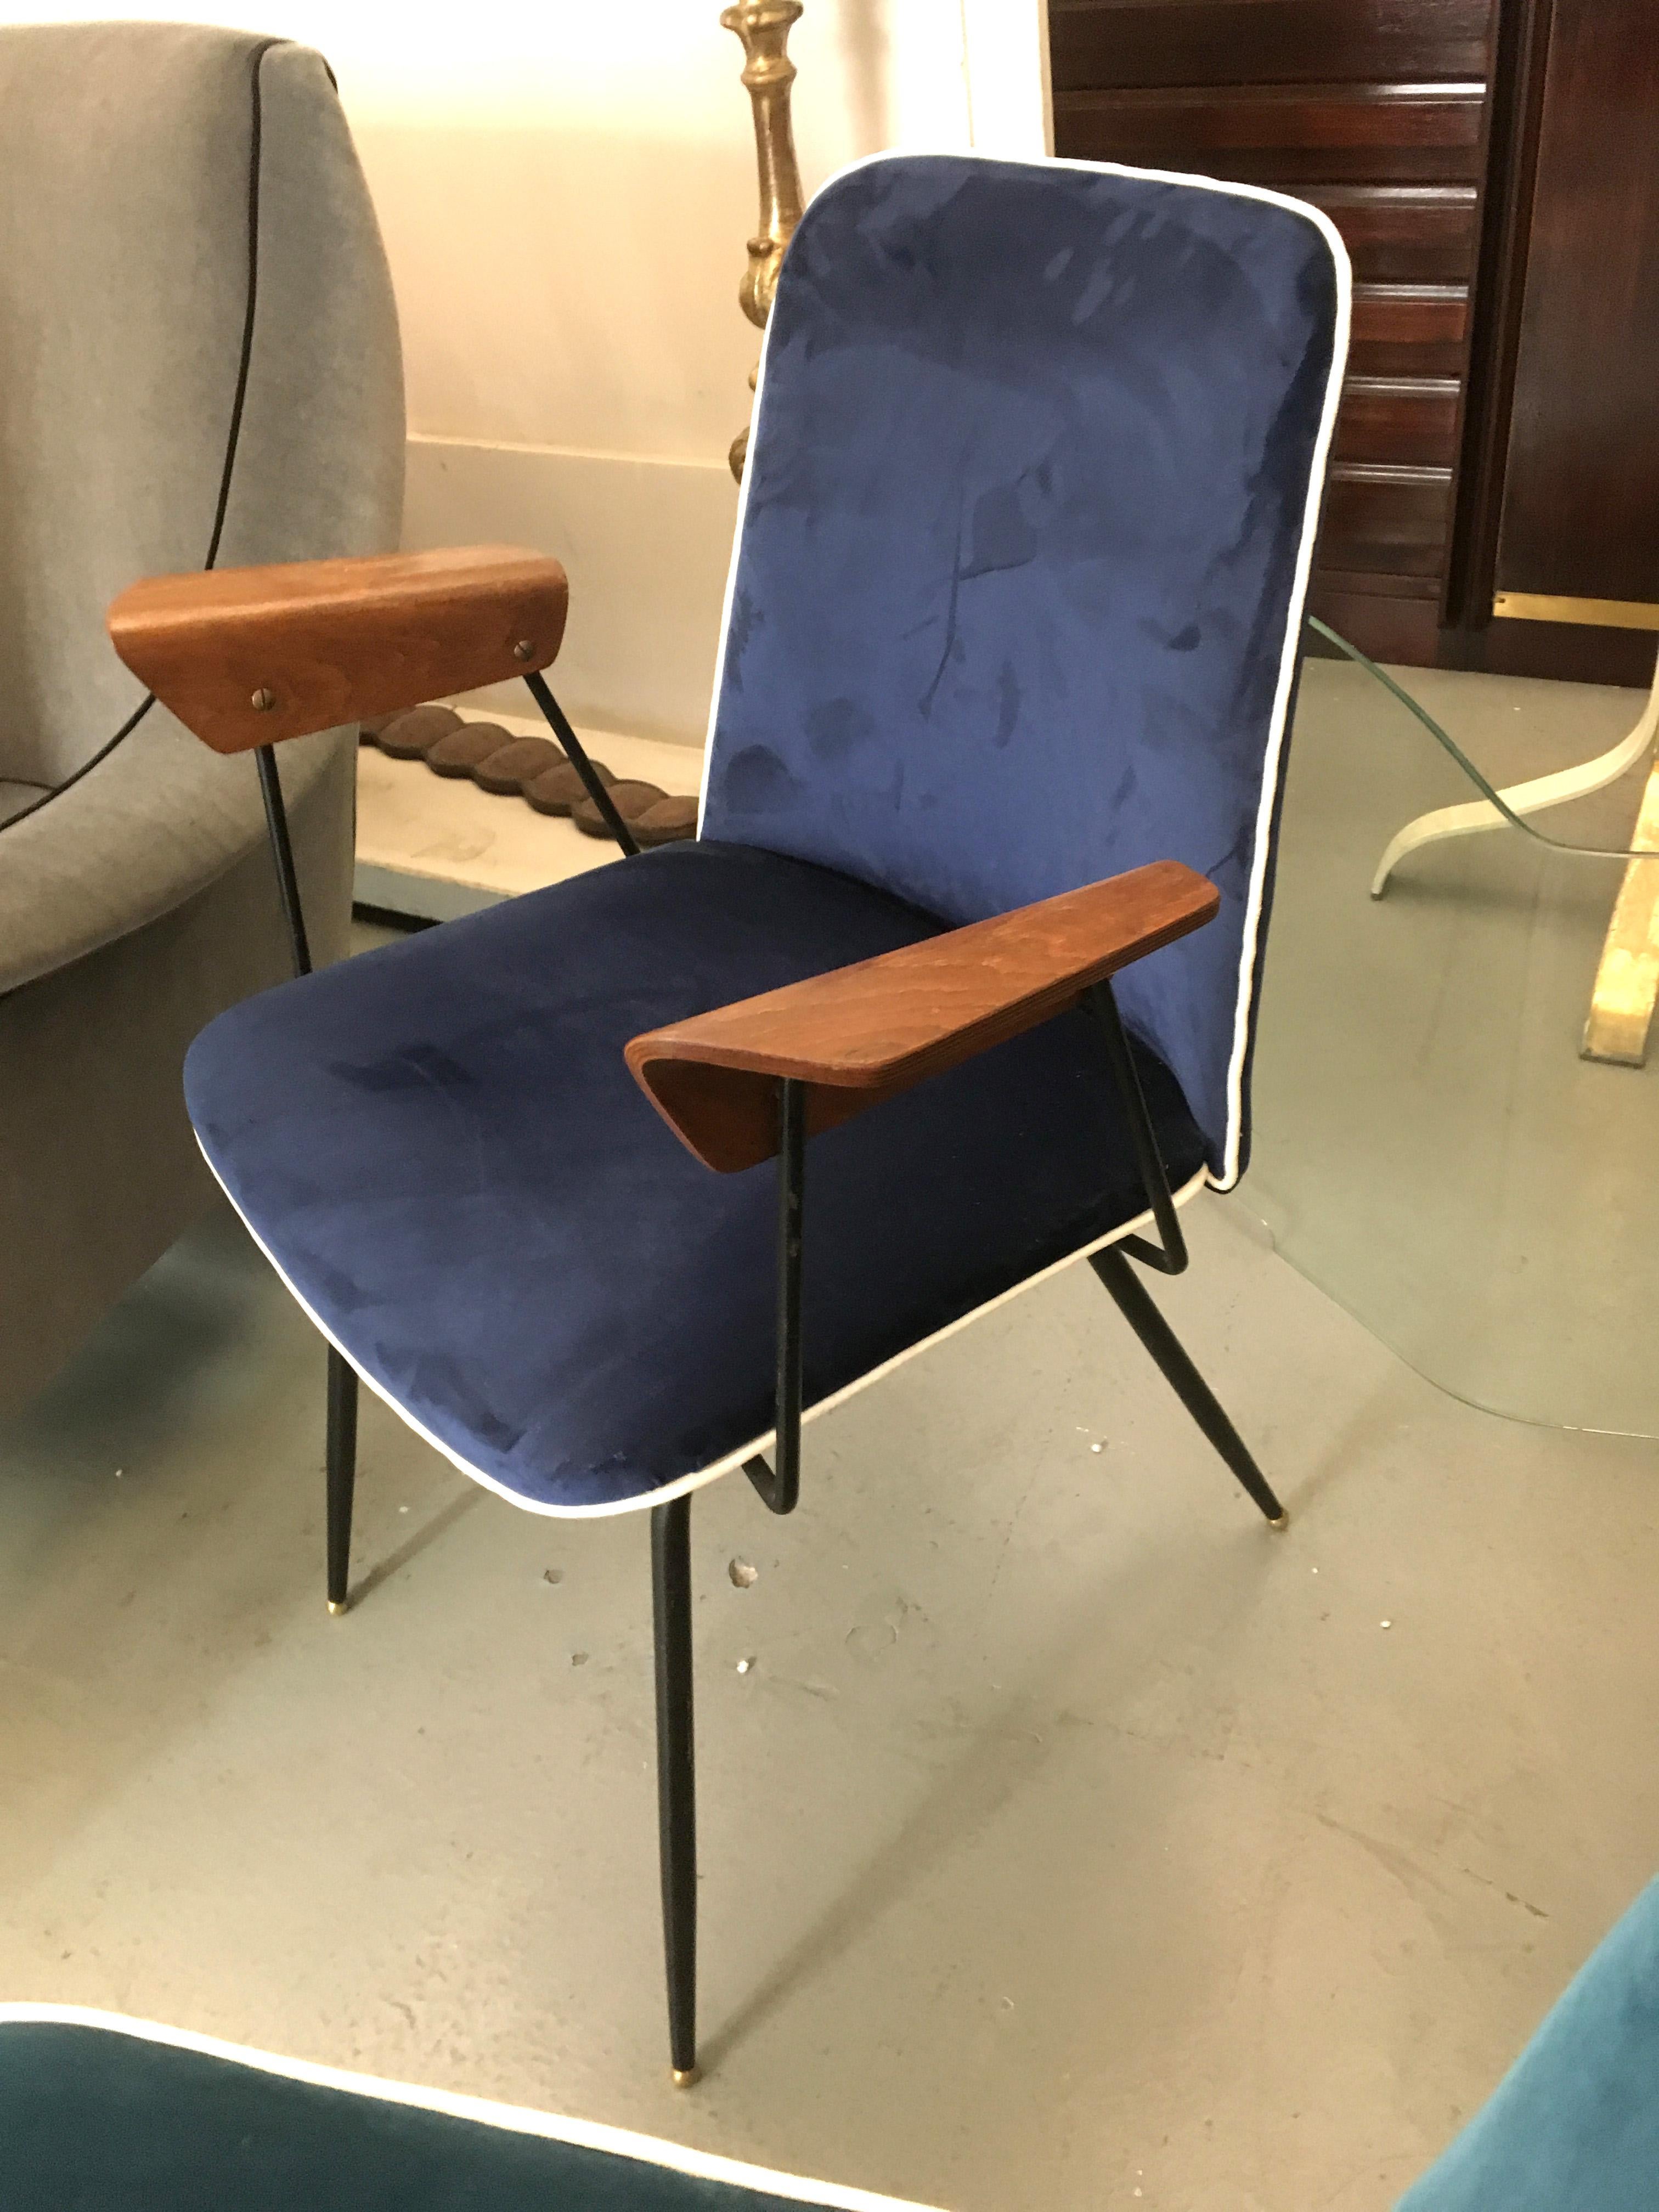 Rare Du22 chairs by Gastone Rinaldi for RIMA with plywood armrest and new blue upholstery on a black metal base. The model was first presented during the 1951 Fair of Arts and Industrial Aesthetics in Milan. Published in 